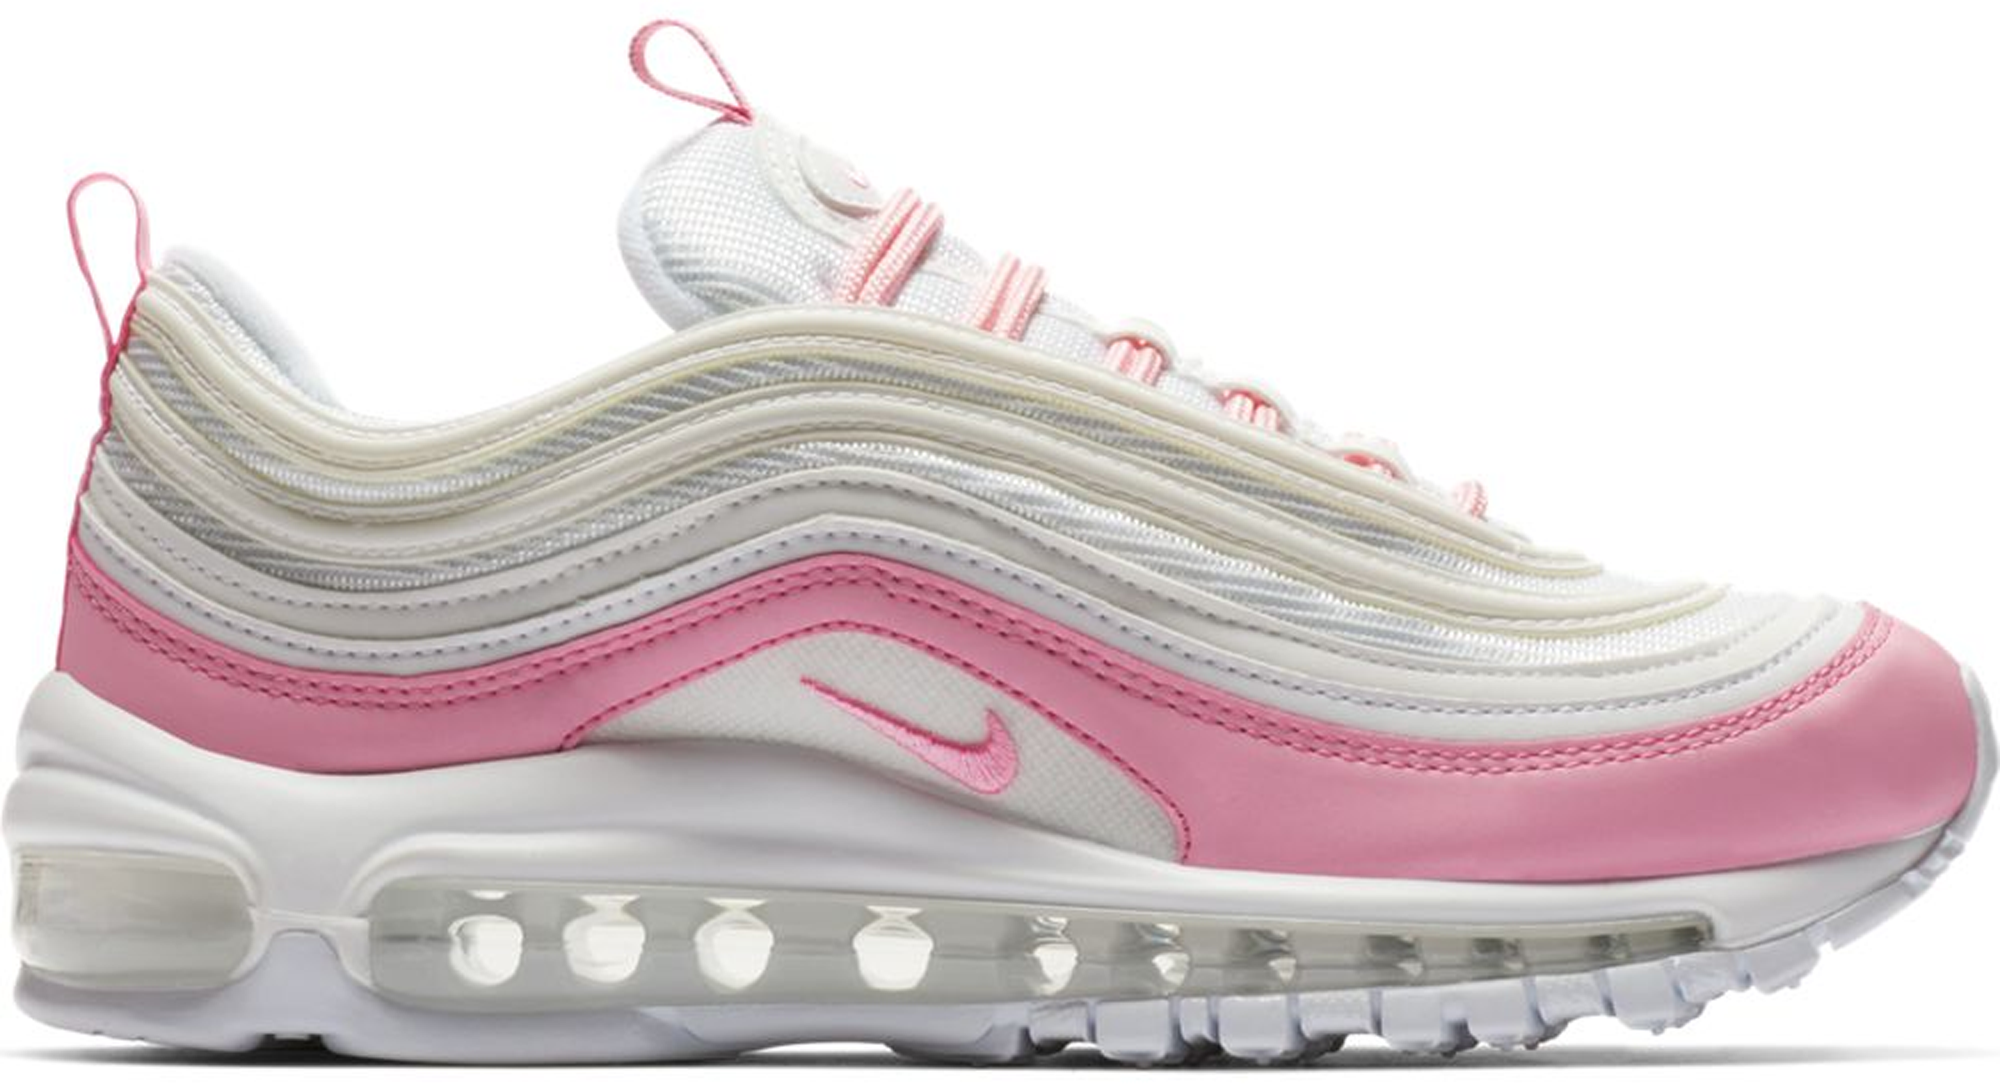 Nike Air Max 97 Psychic Pink (W 